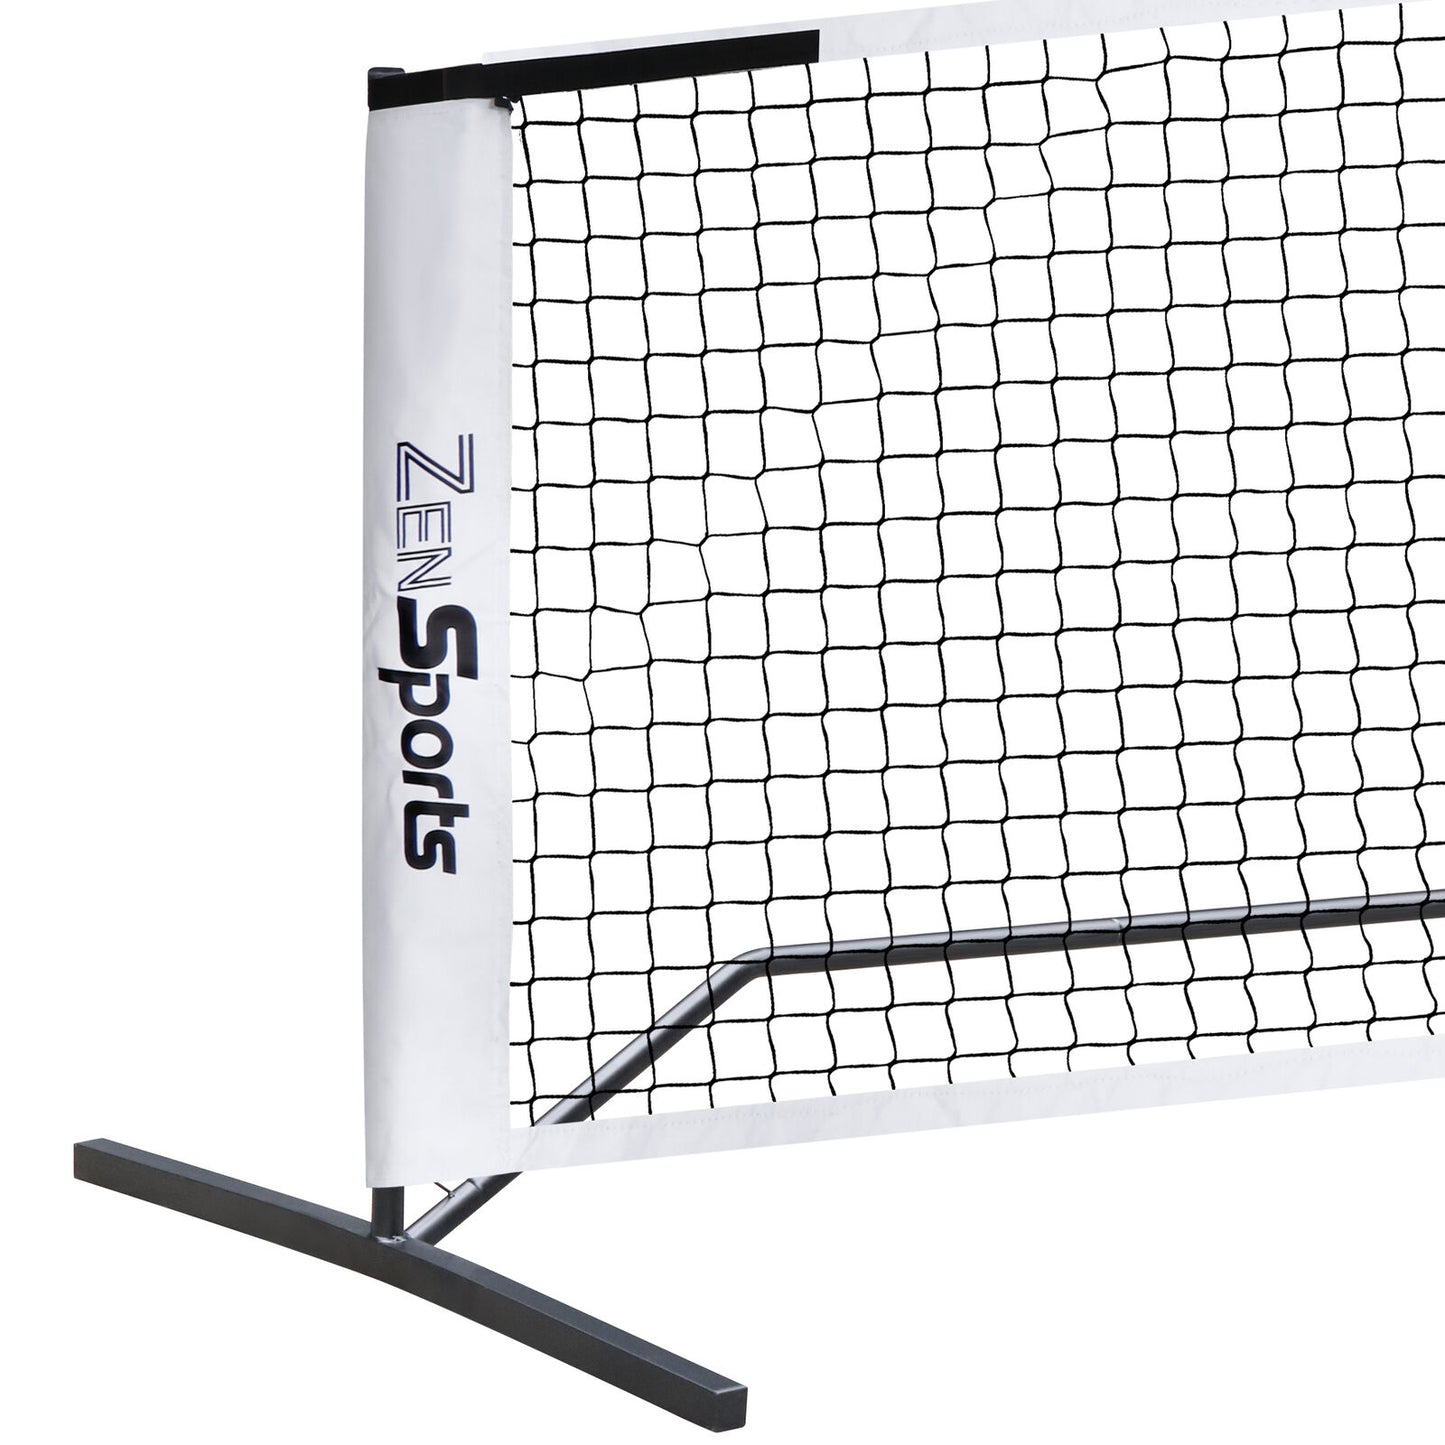 Portable Pickleball Net Set with Metal Frame Stand Carrying Bag Regulation Size